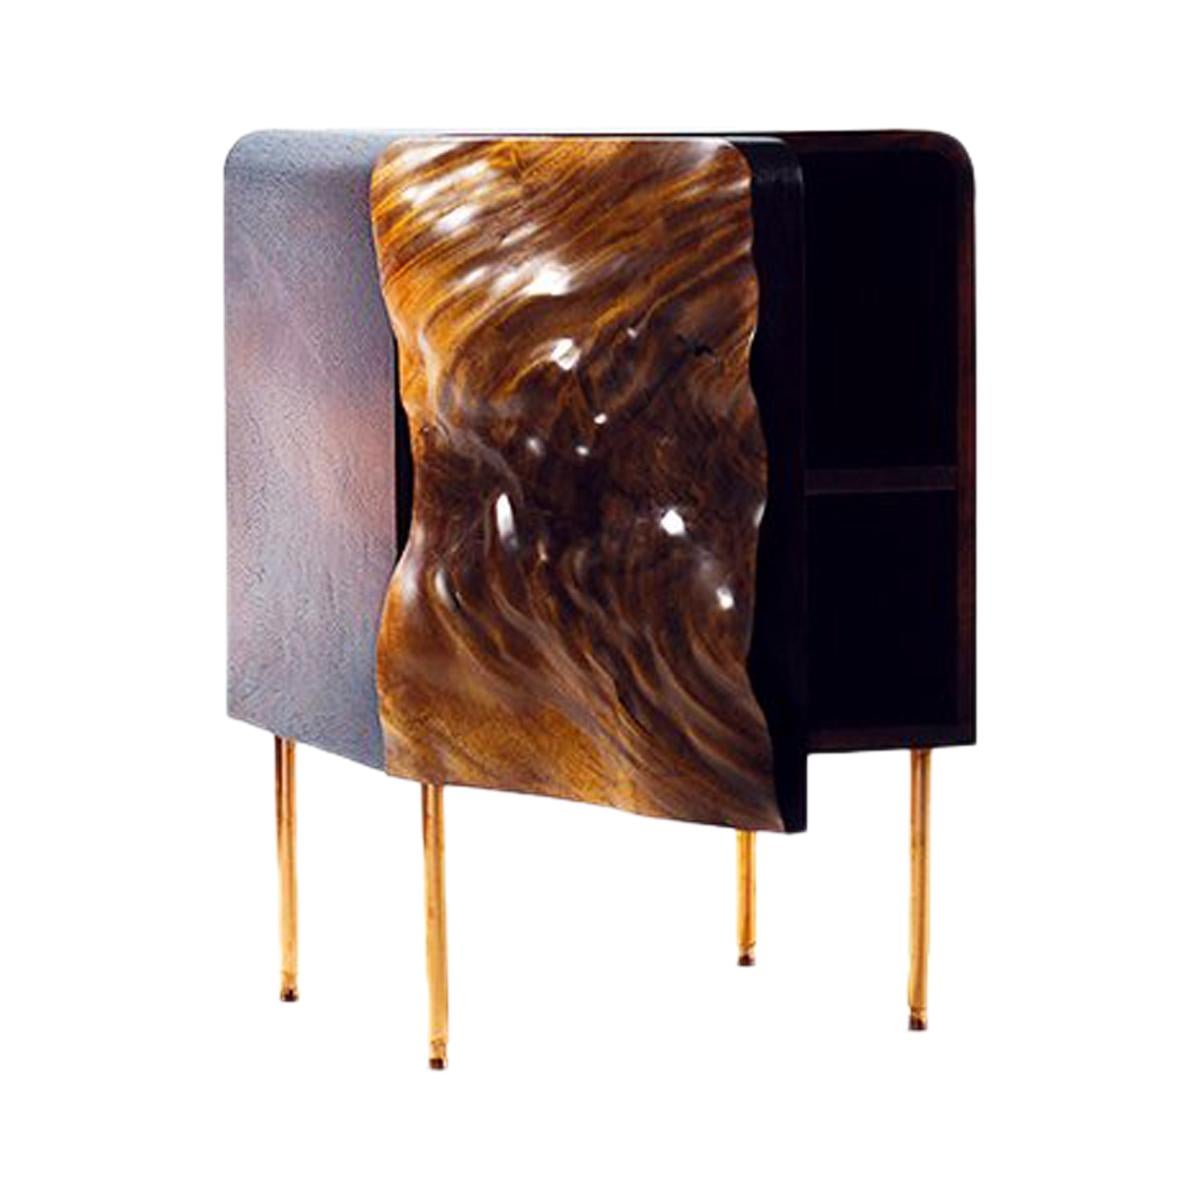 African Mahogany Night Stand Bedside Cabinet with Copper Plated Steel Legs